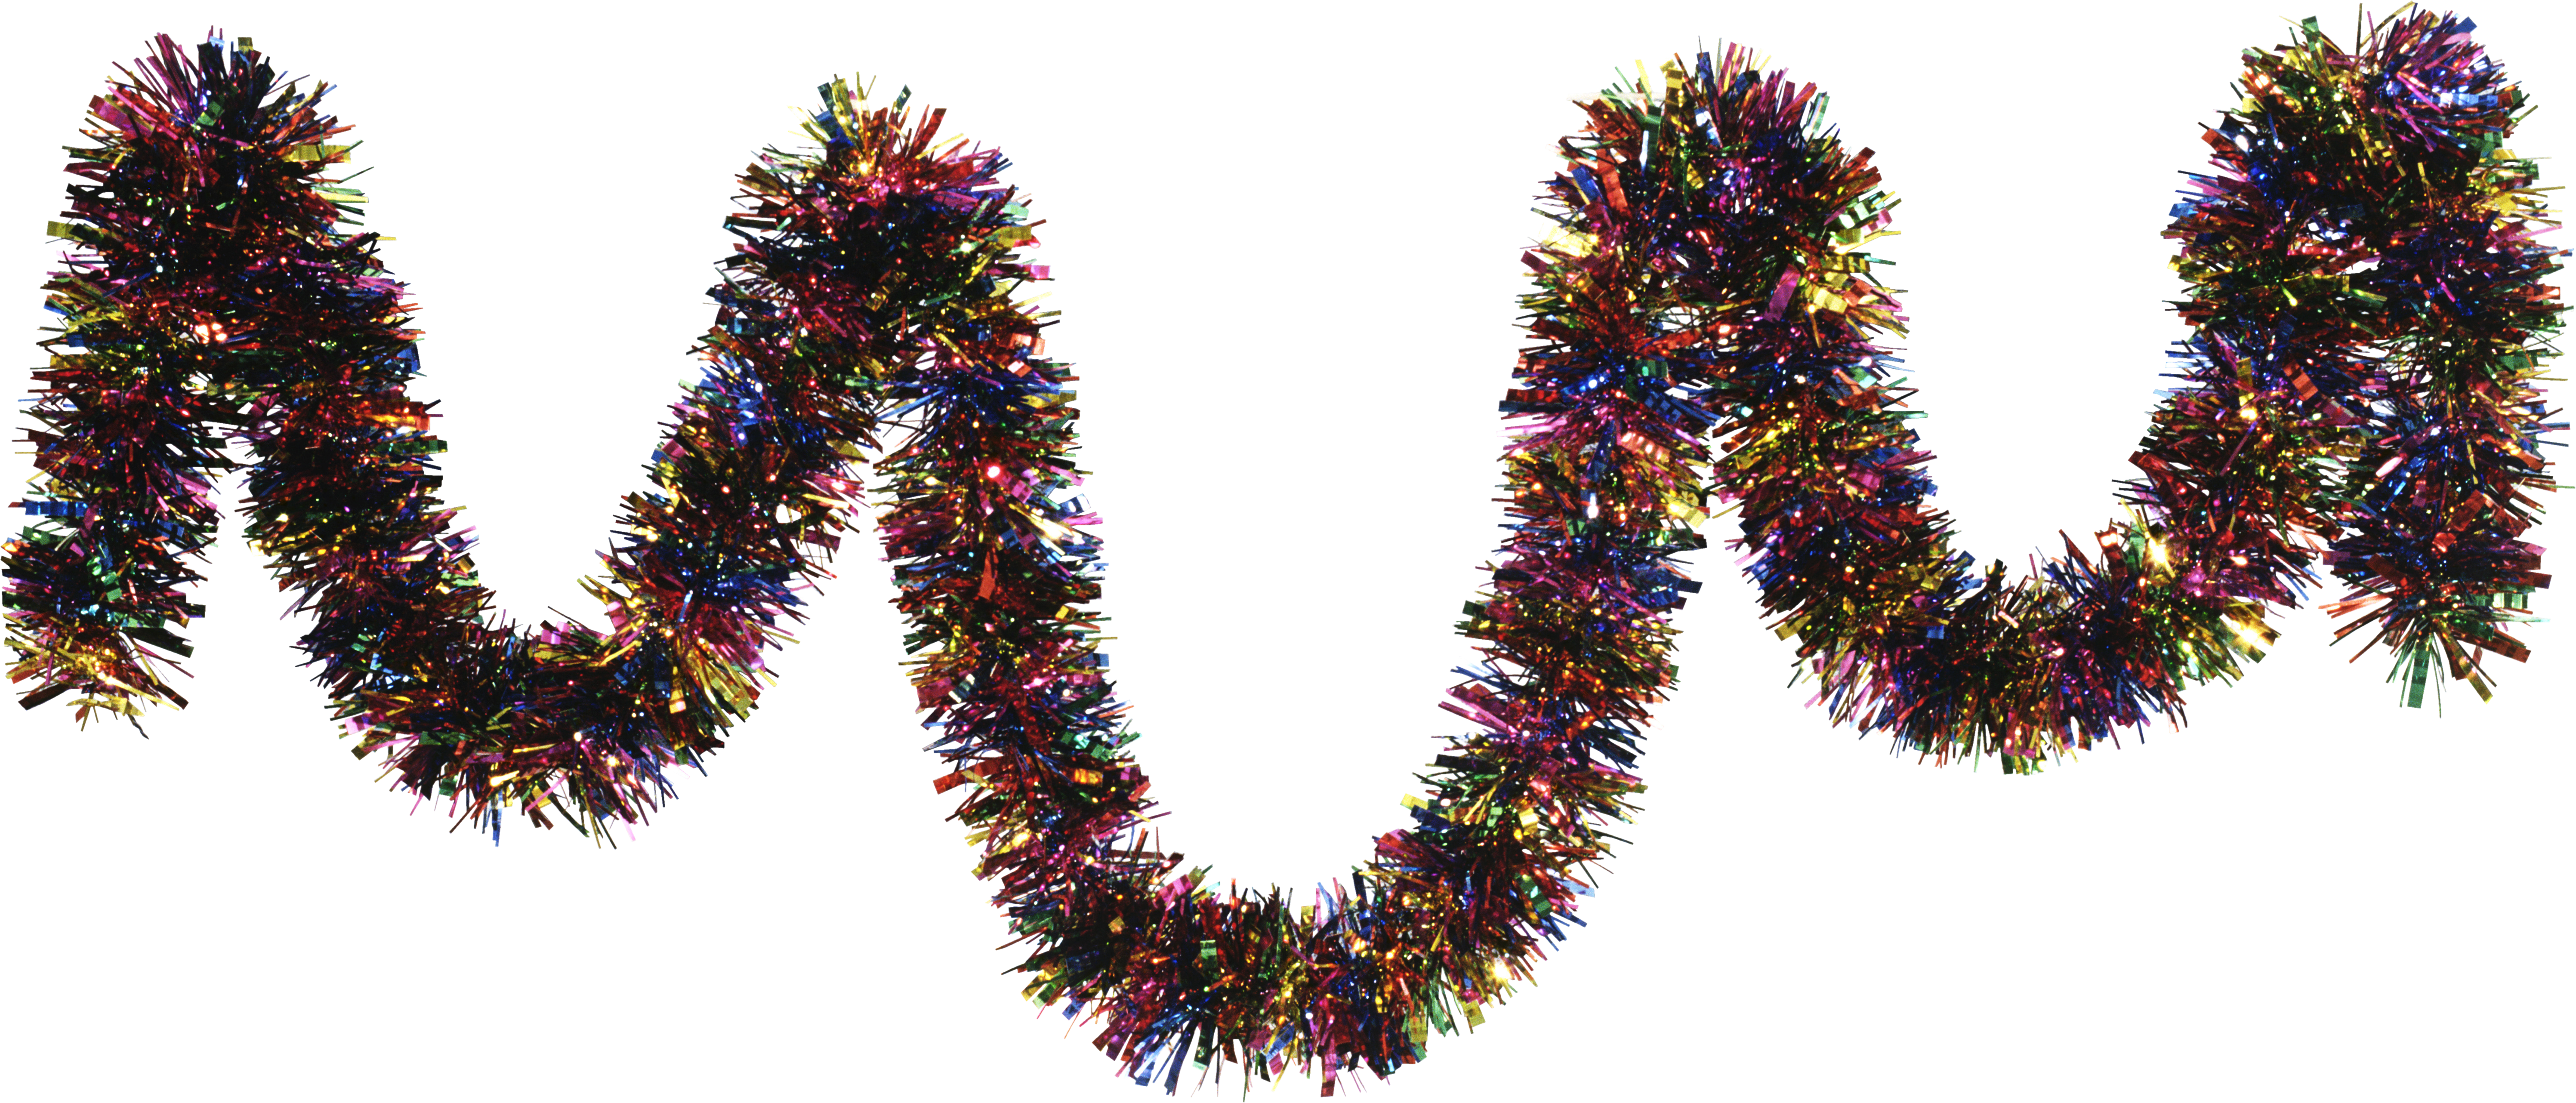 Tinsel PNG images for free download.